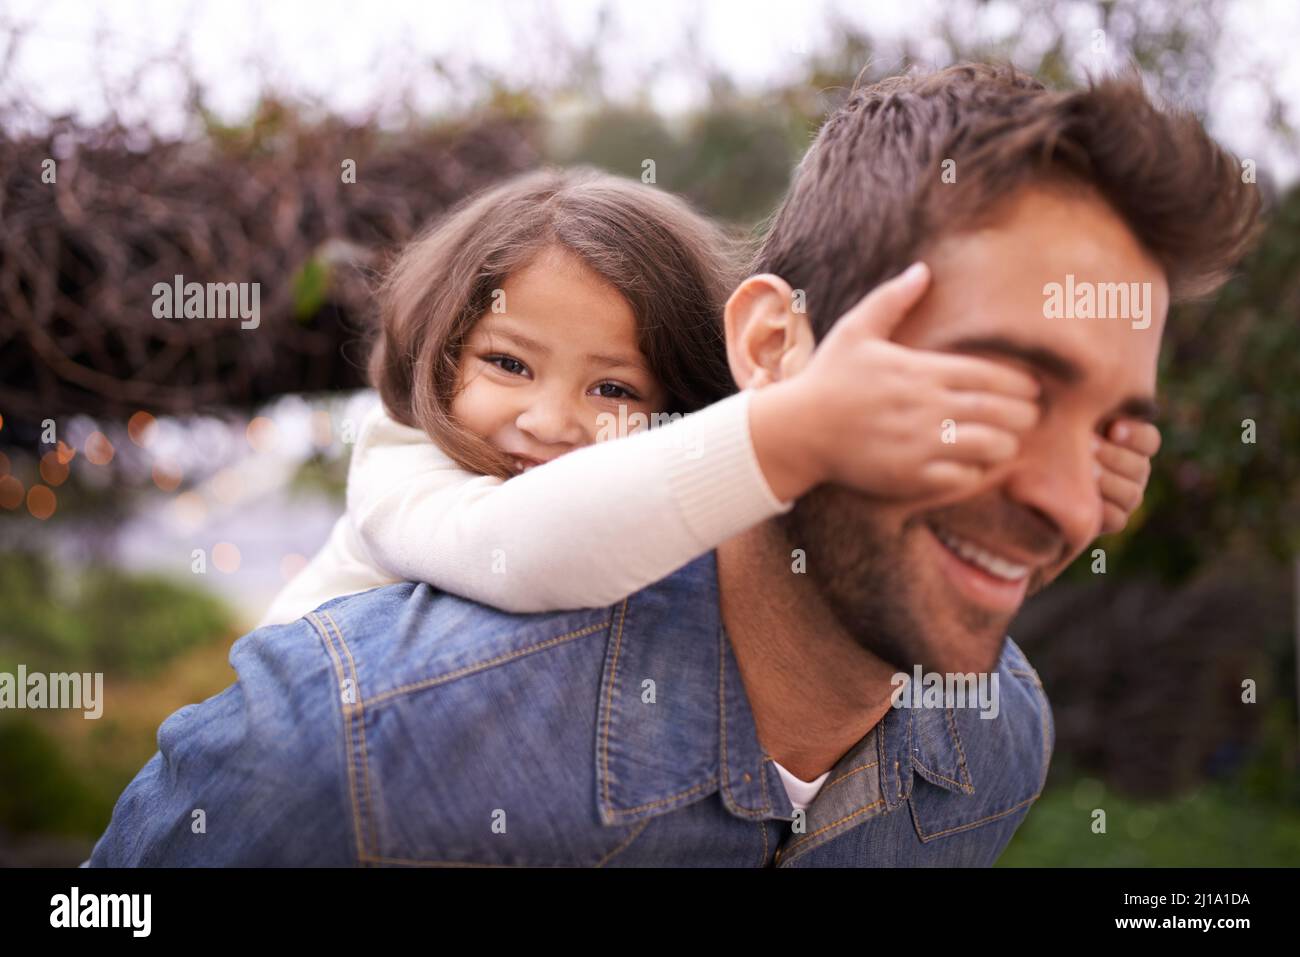 Guess who. A little girl and her father playing outdoors. Stock Photo